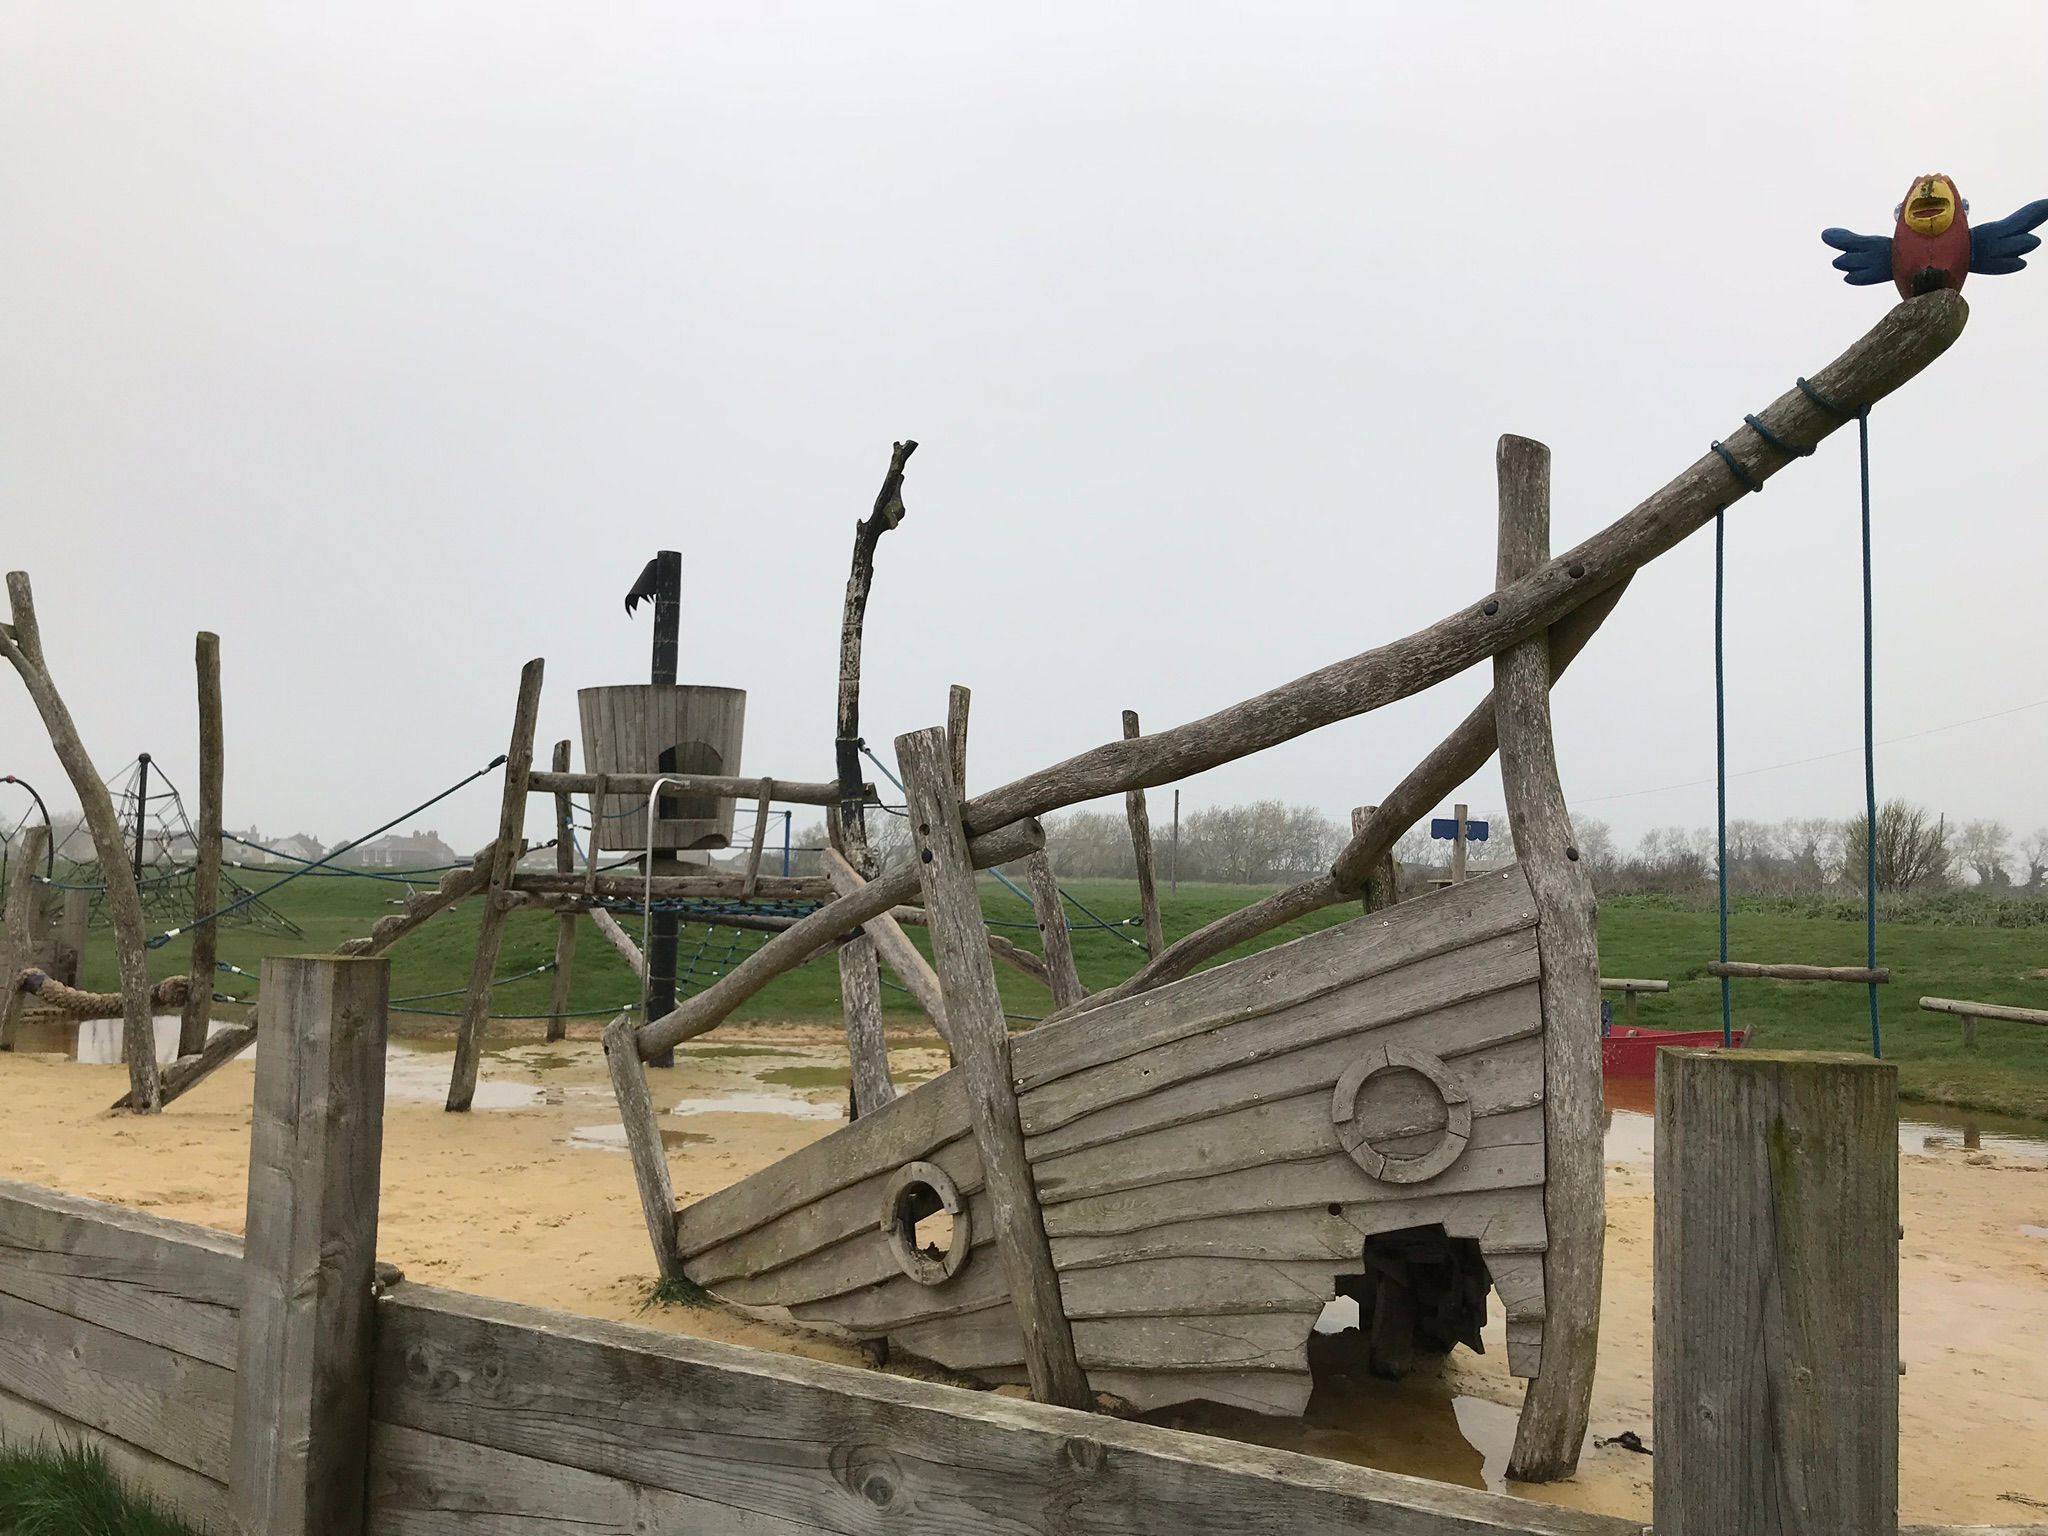 Pirate themed wooden play equipment in the sand pit